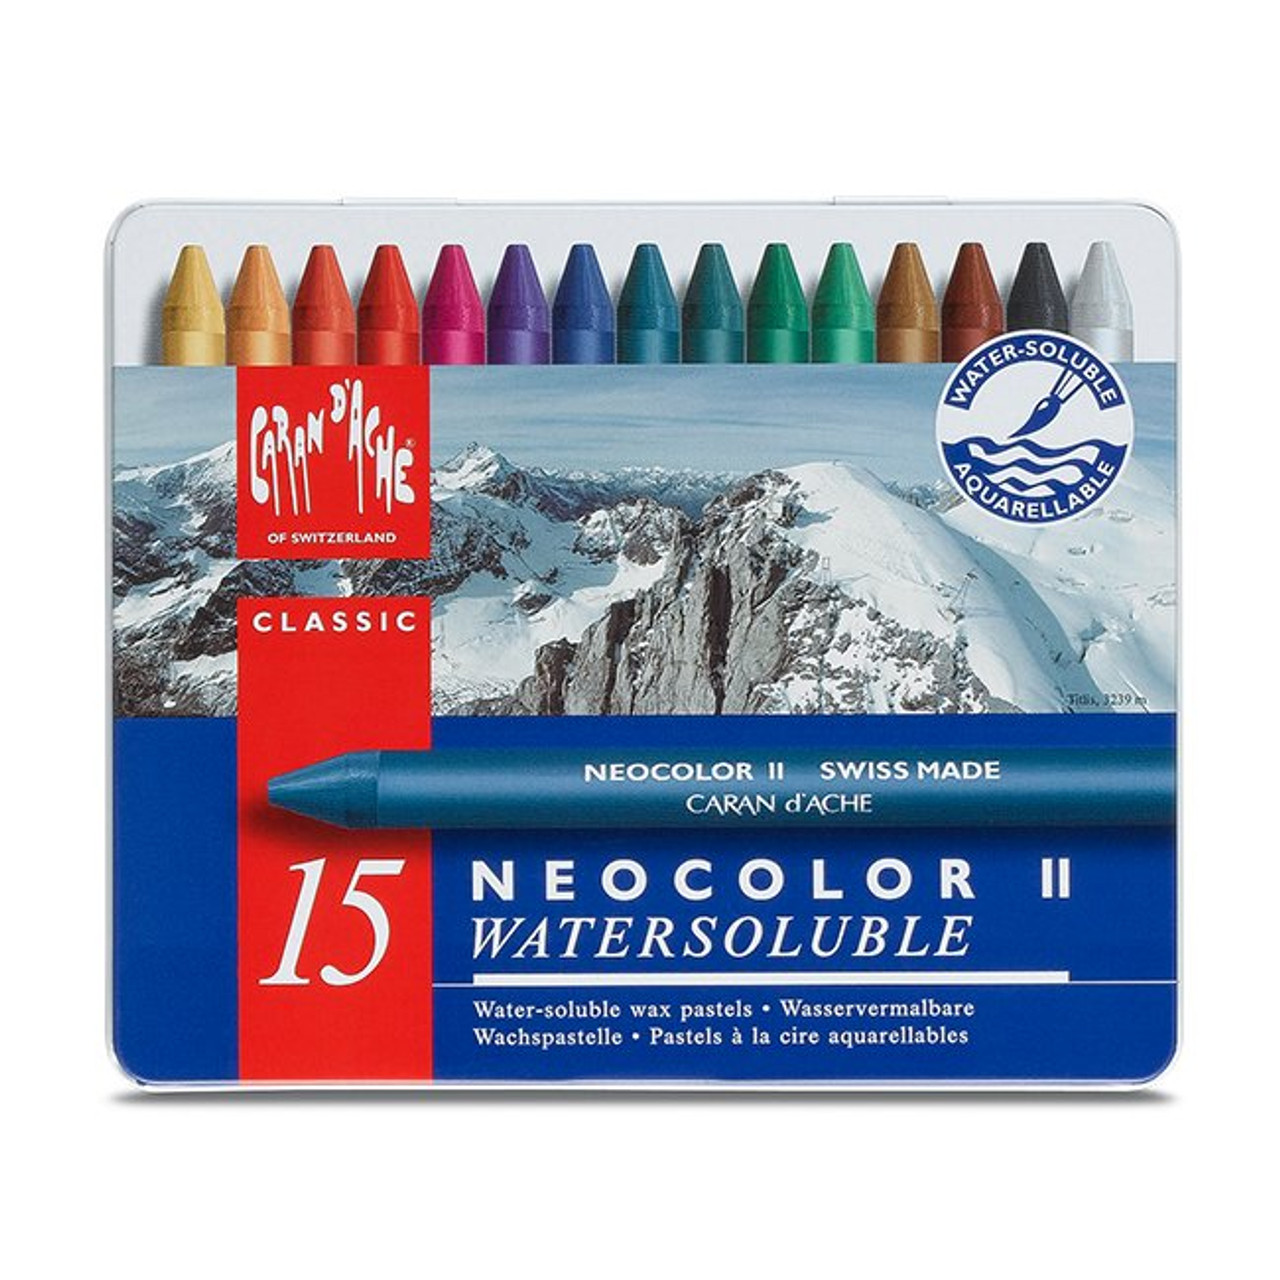 Caran D'Ache Classic Neocolor II Water-Soluble Crayons, 15 Assorted Colors